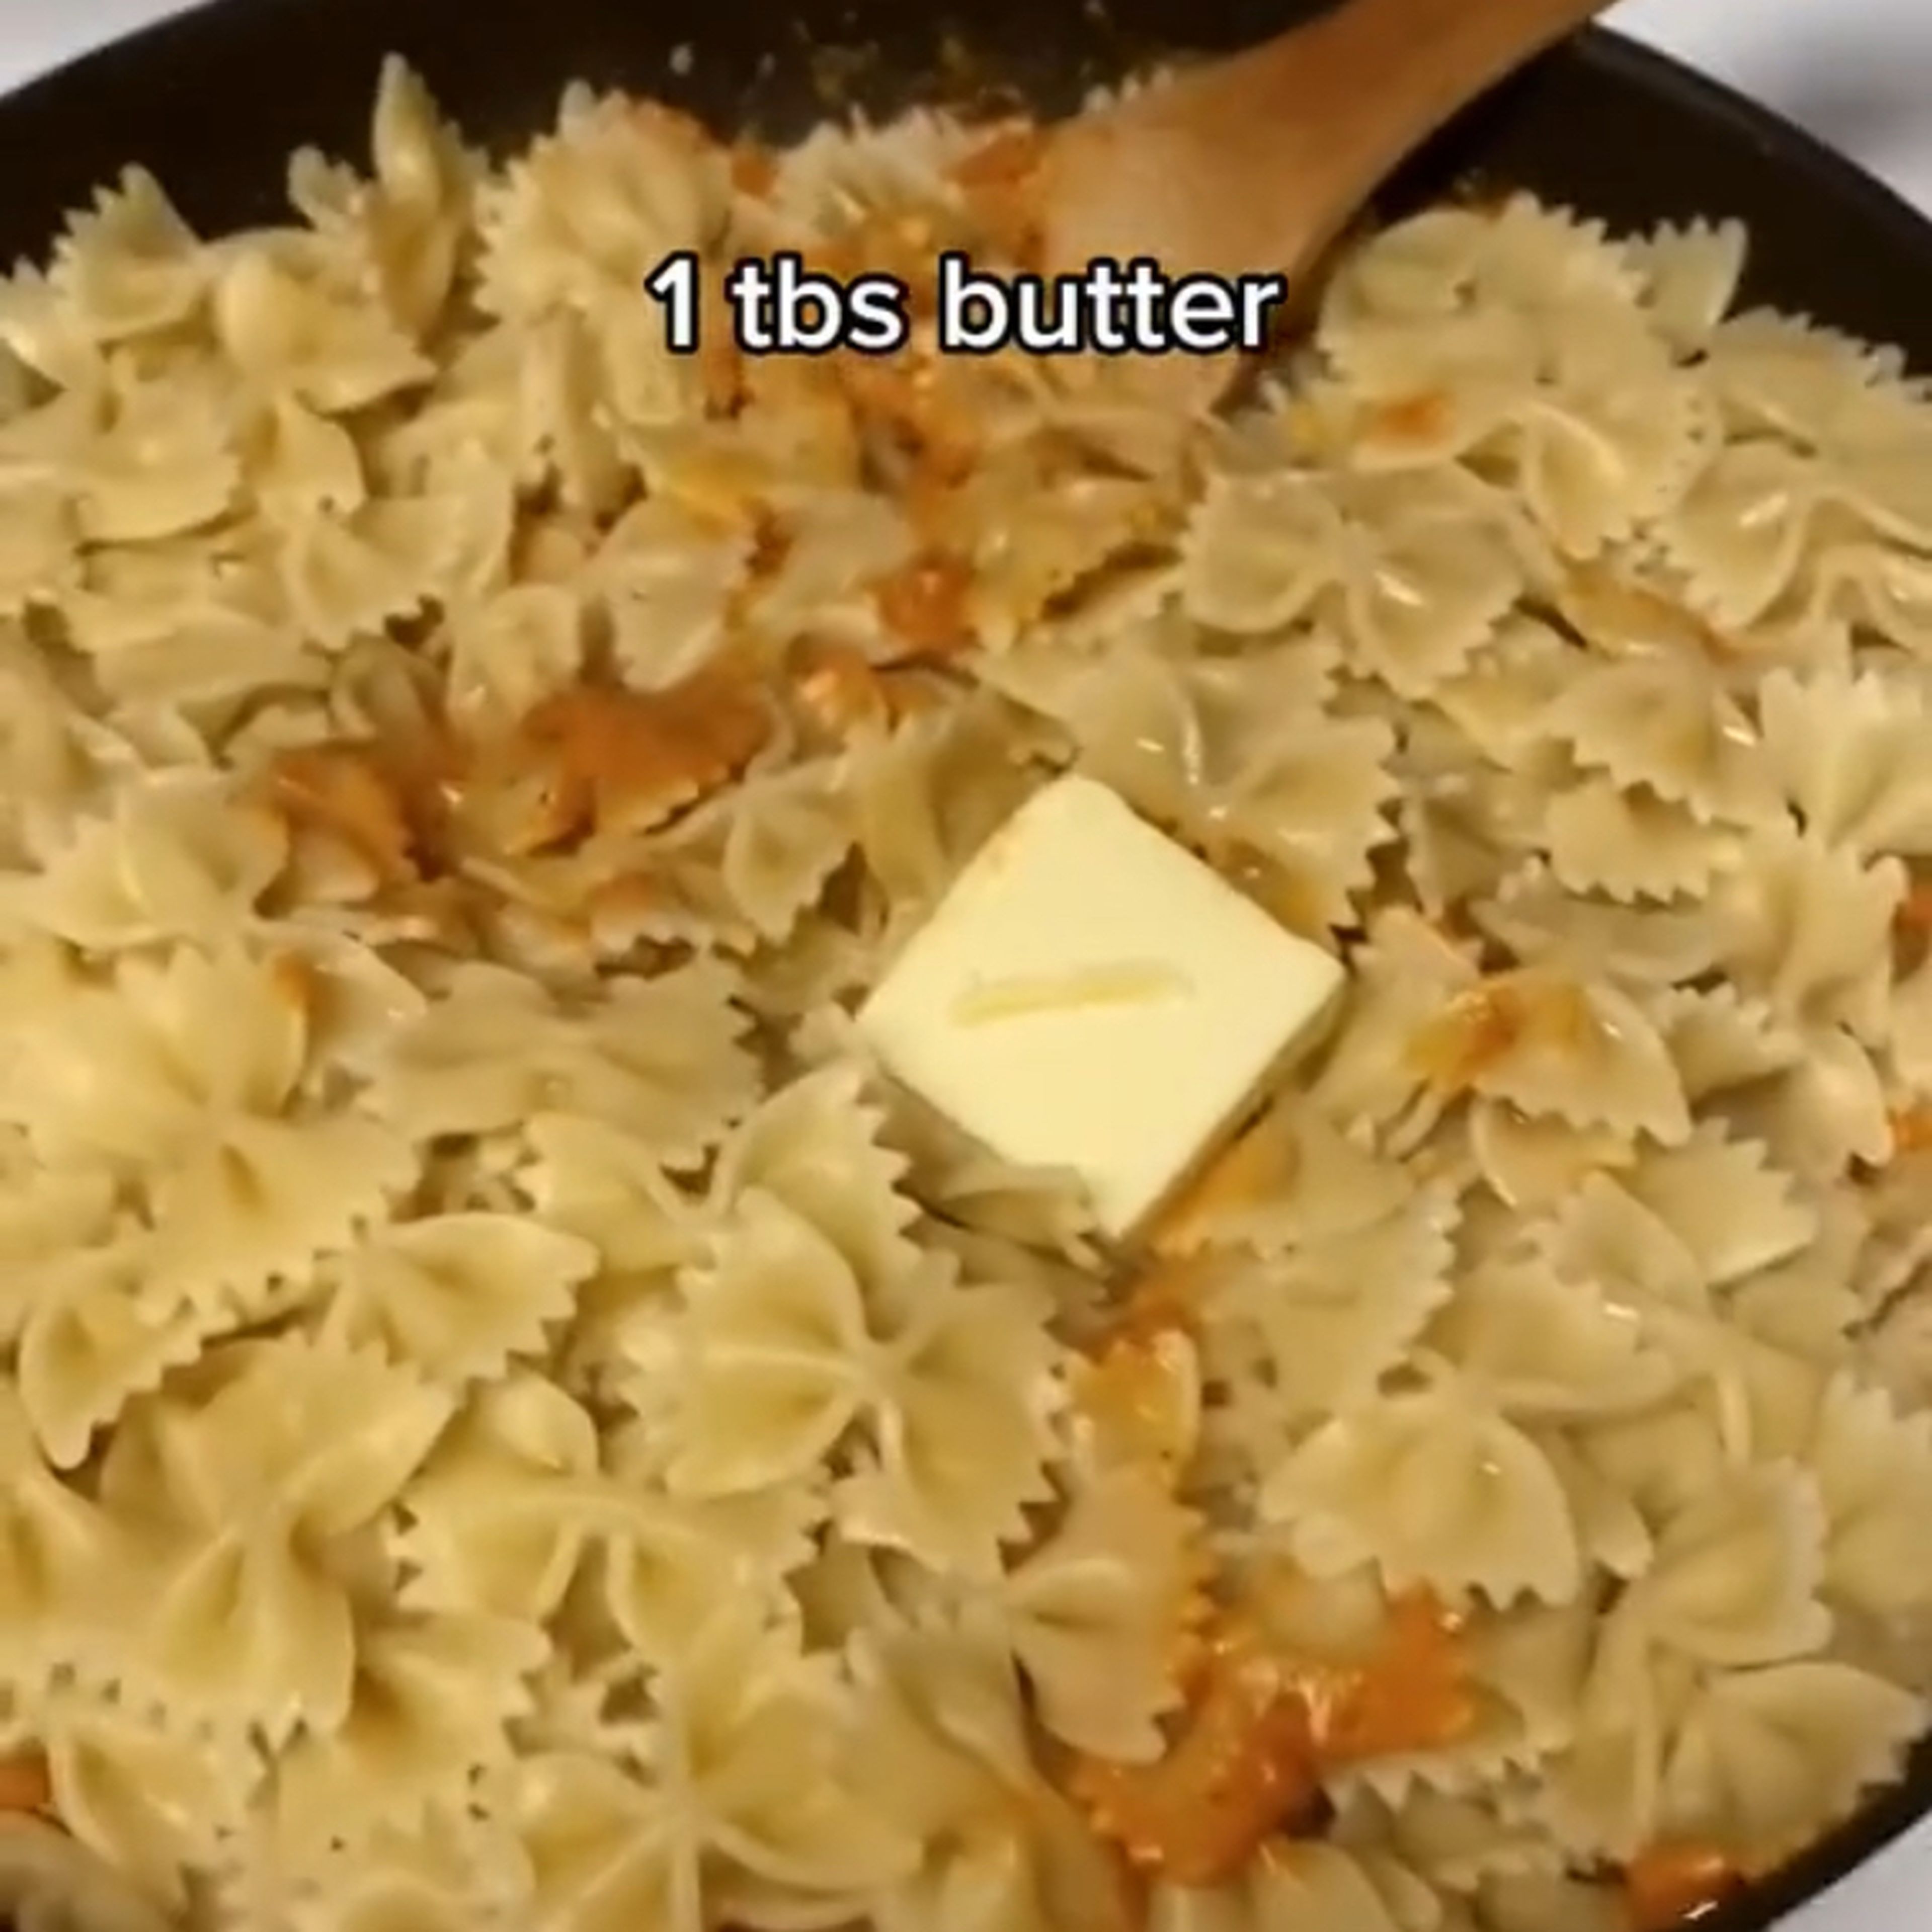 Put the butter on top.